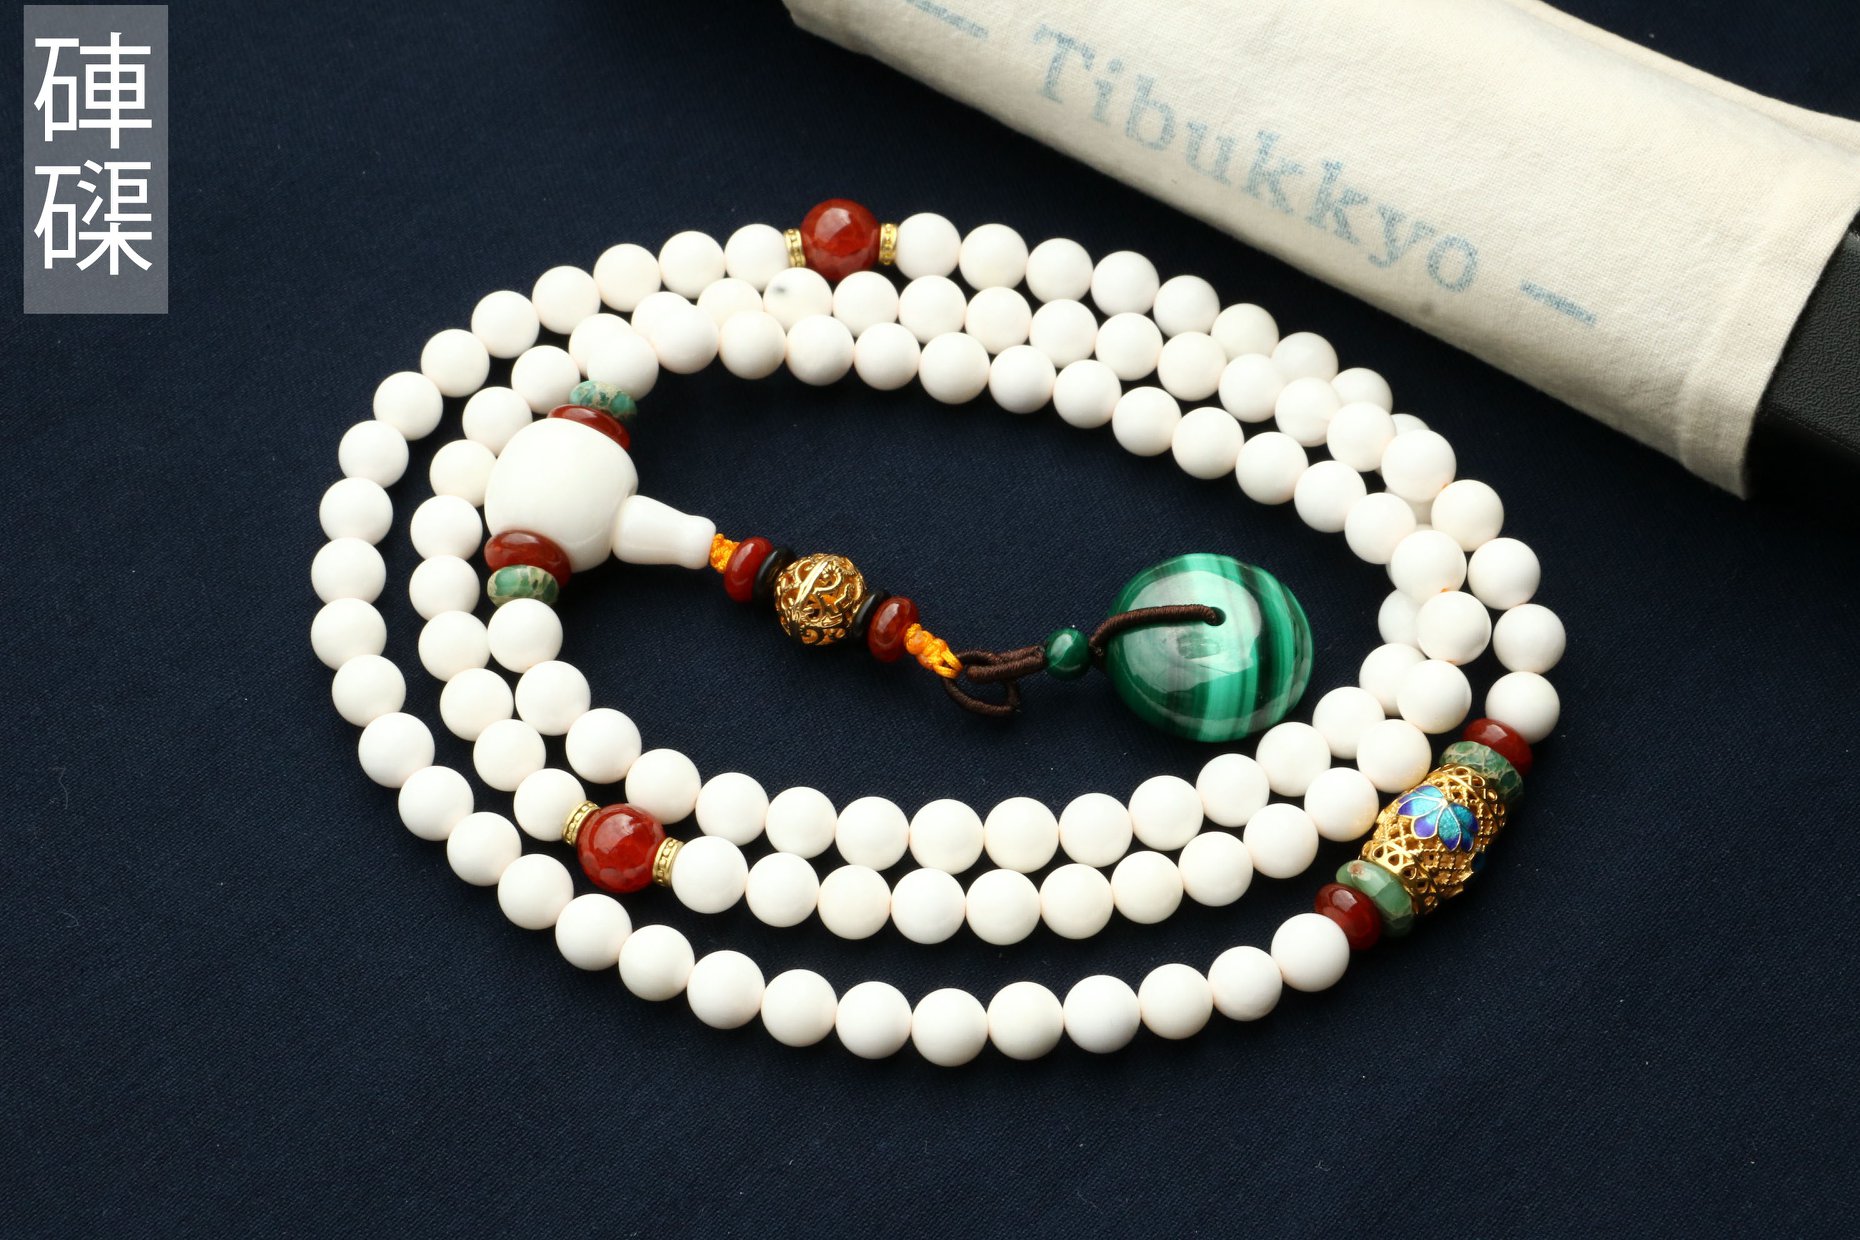 Taiwan Derong Collection｜108 Semi-jade Tridacna 8mm Round Beads｜Southern Red Agate Beads｜Malachite Safety Buckle